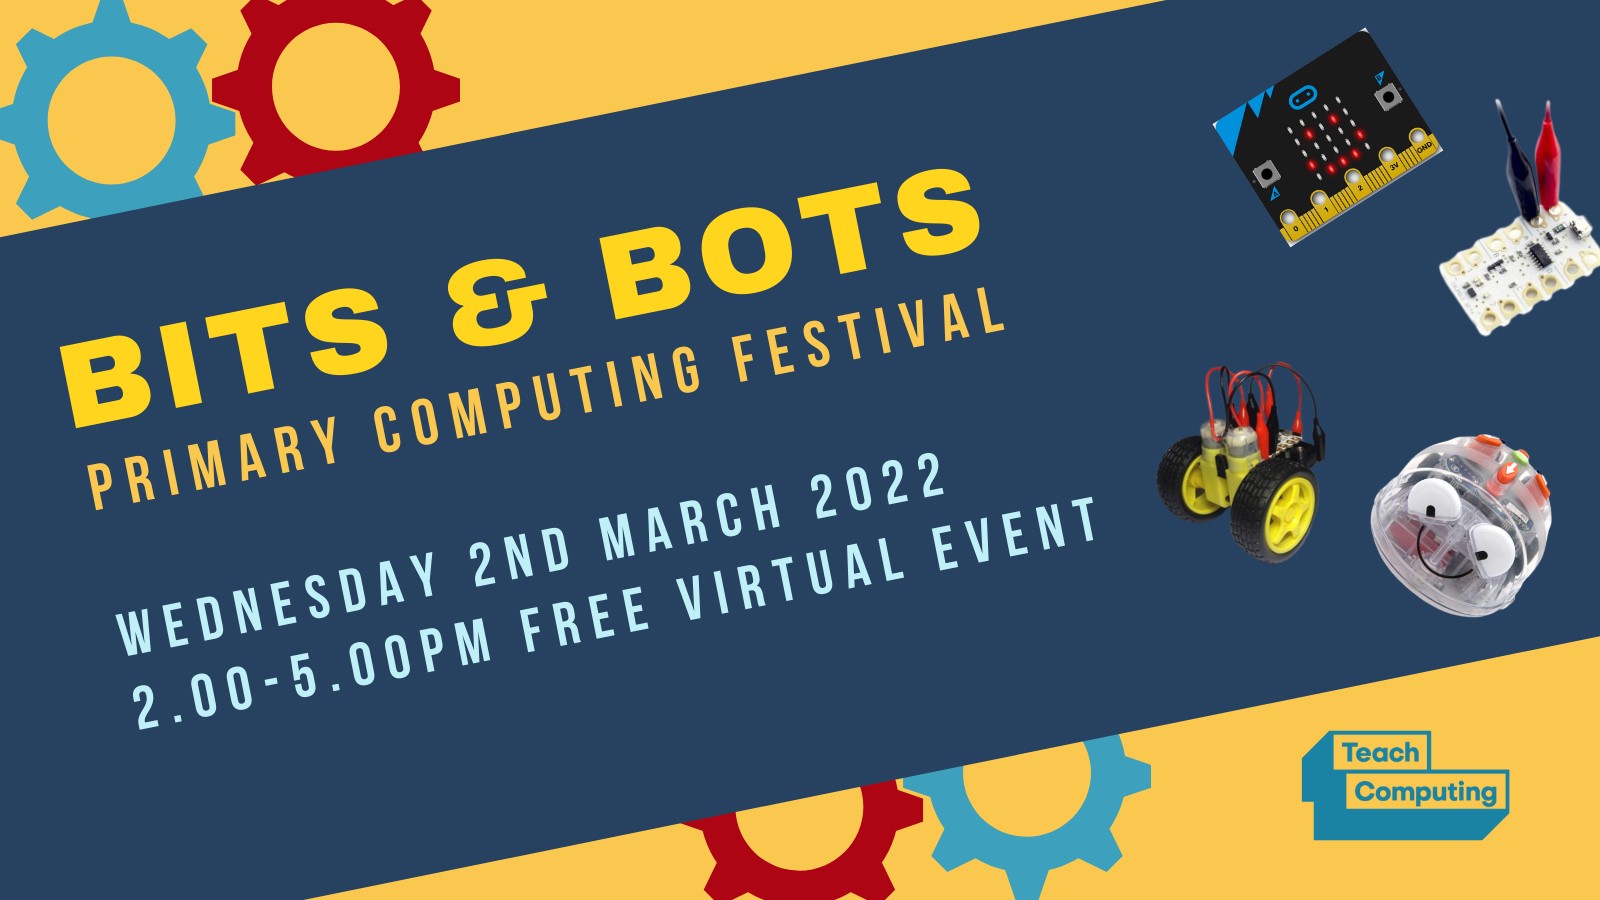 Bits & Bots Primary Computing Festival, 2nd March 2022